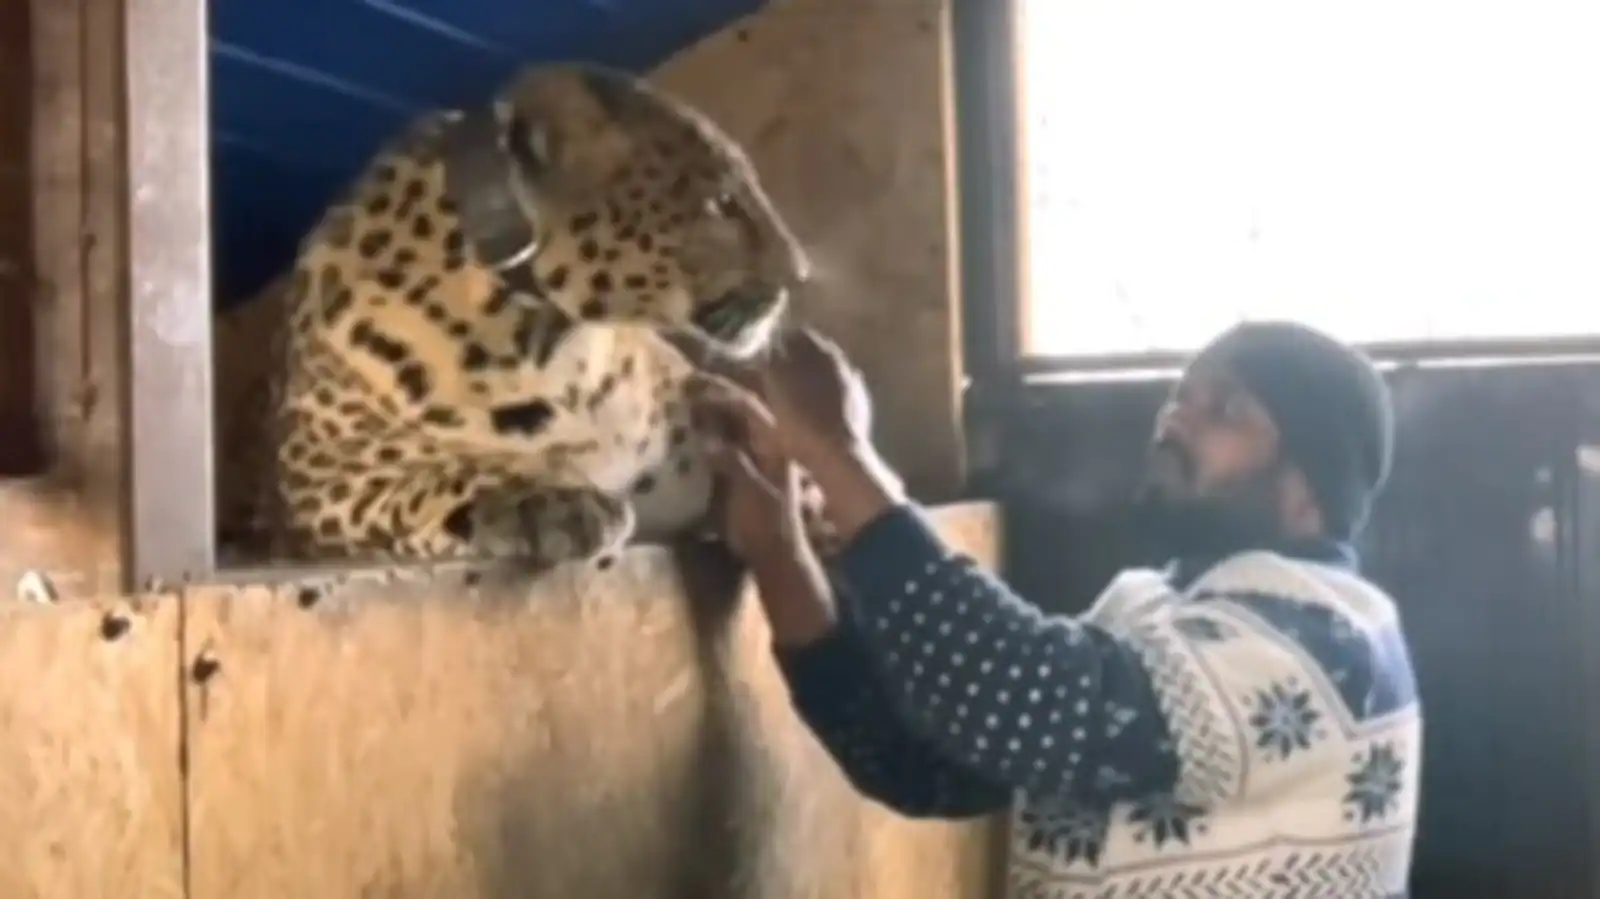 Indian doctor refuses to leave Ukraine without his pets. He has a jaguar and panther